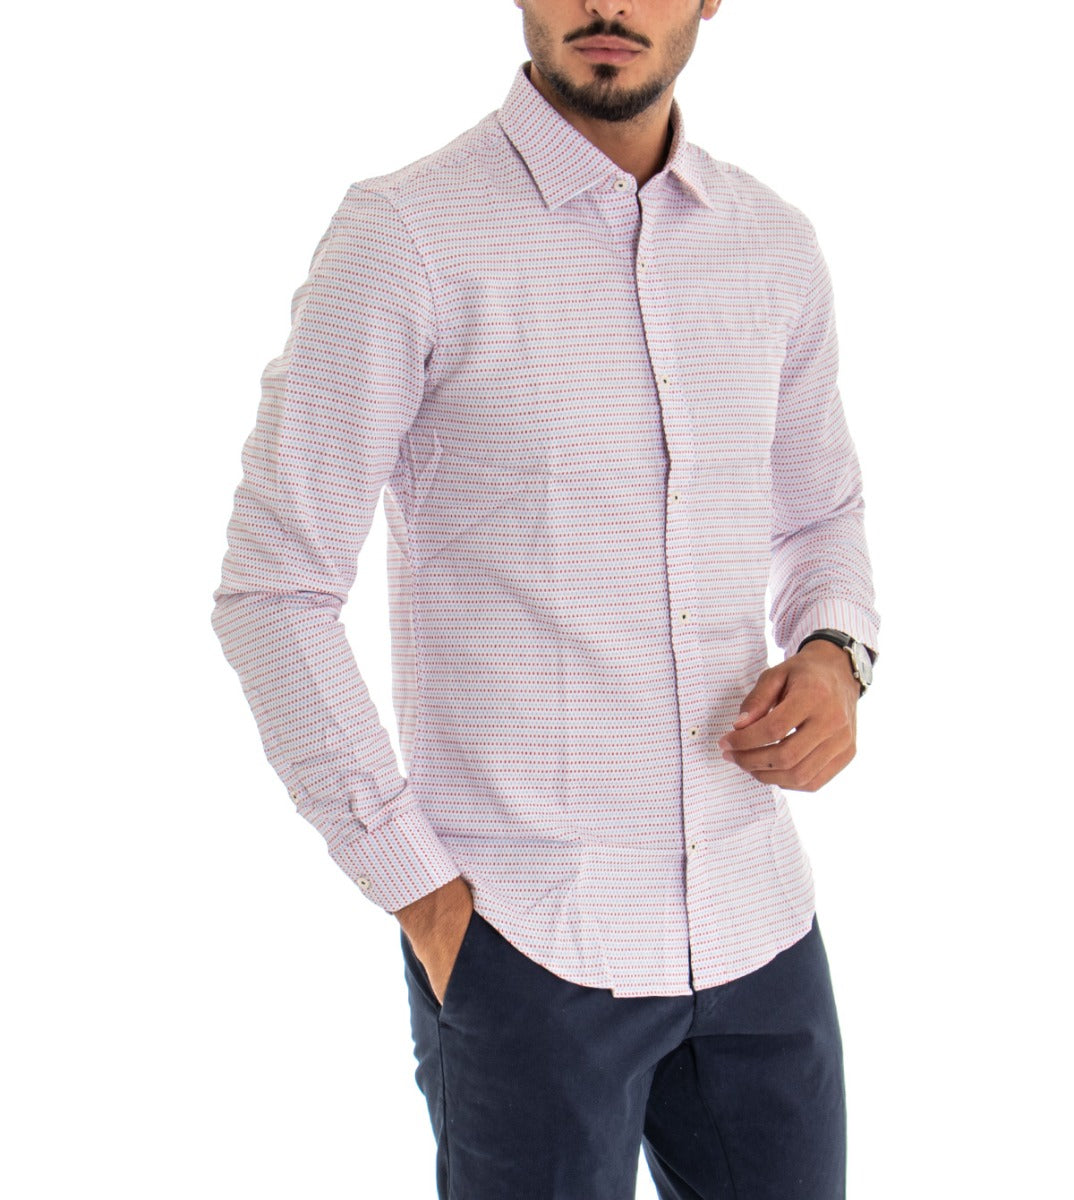 Men's Shirt With Collar Long Sleeve Slim Fit Casual Cotton White GIOSAL-C1803A